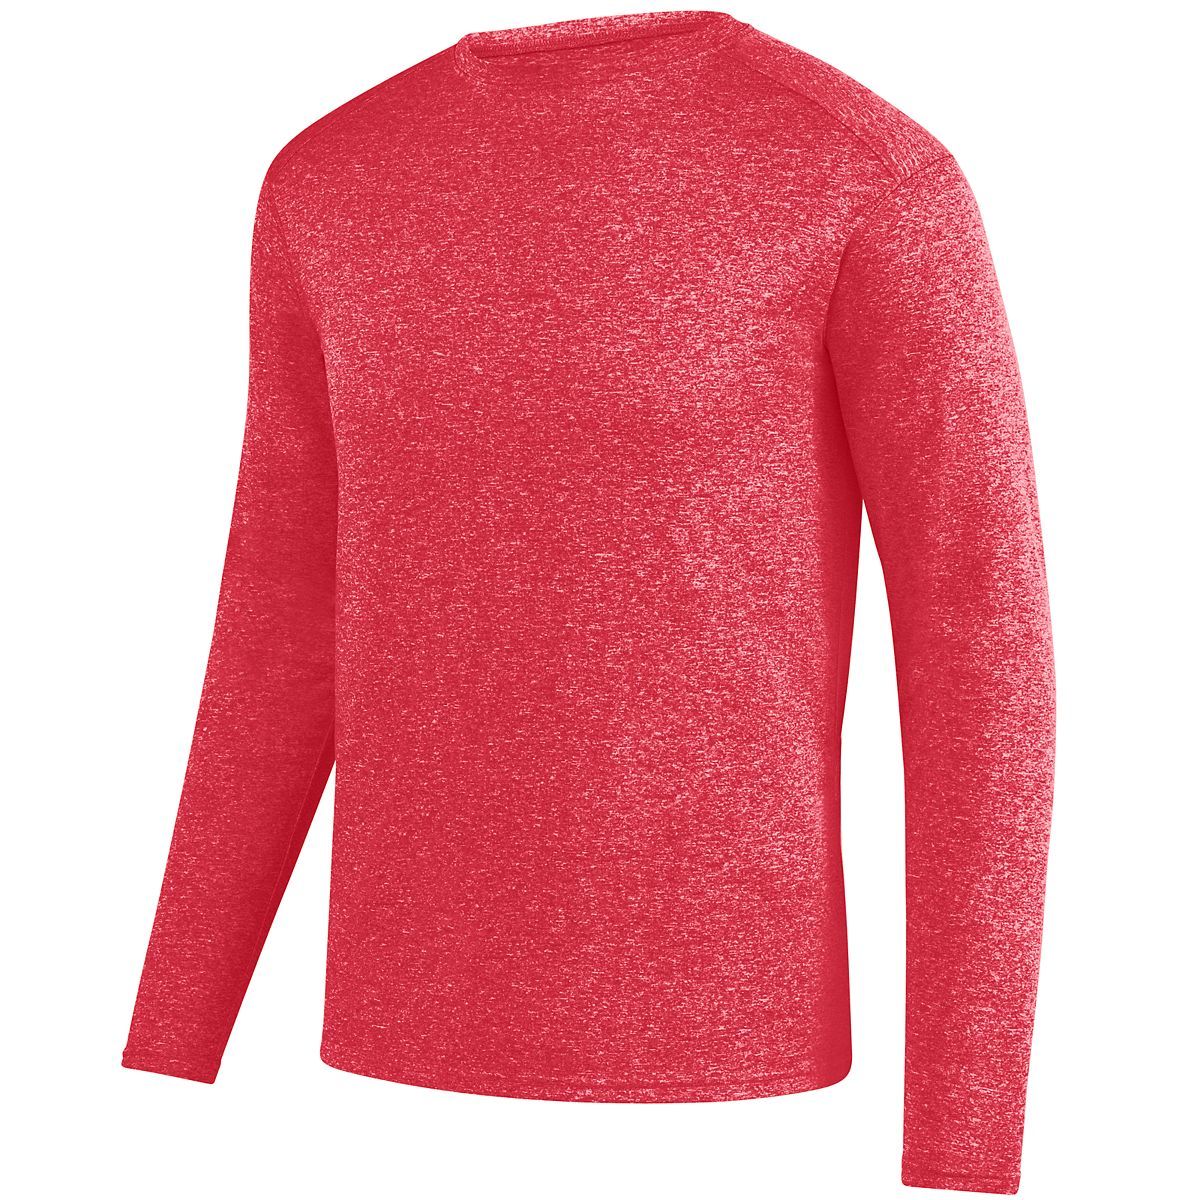 Augusta Sportswear Kinergy Long Sleeve Tee in Red Heather  -Part of the Adult, Adult-Tee-Shirt, T-Shirts, Augusta-Products, Shirts product lines at KanaleyCreations.com